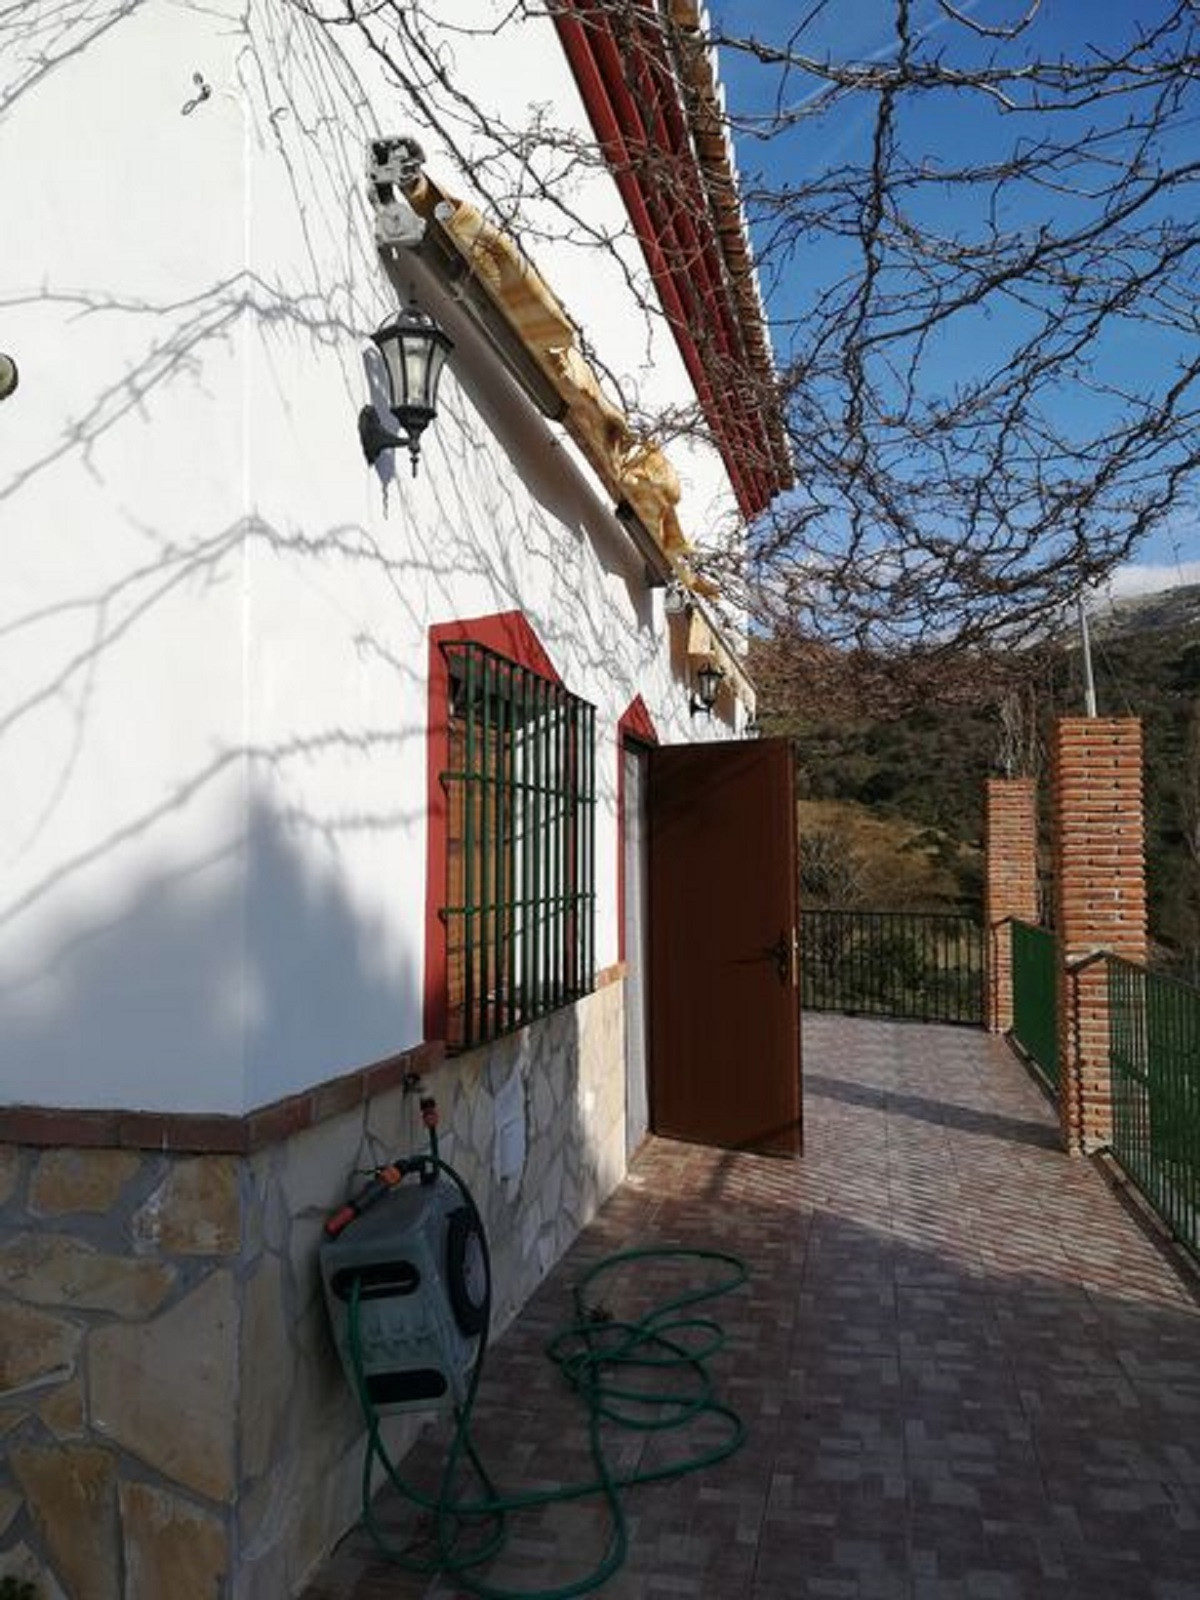 This very spacious country house is situated in the hills near the beautiful village of Alcaucín.